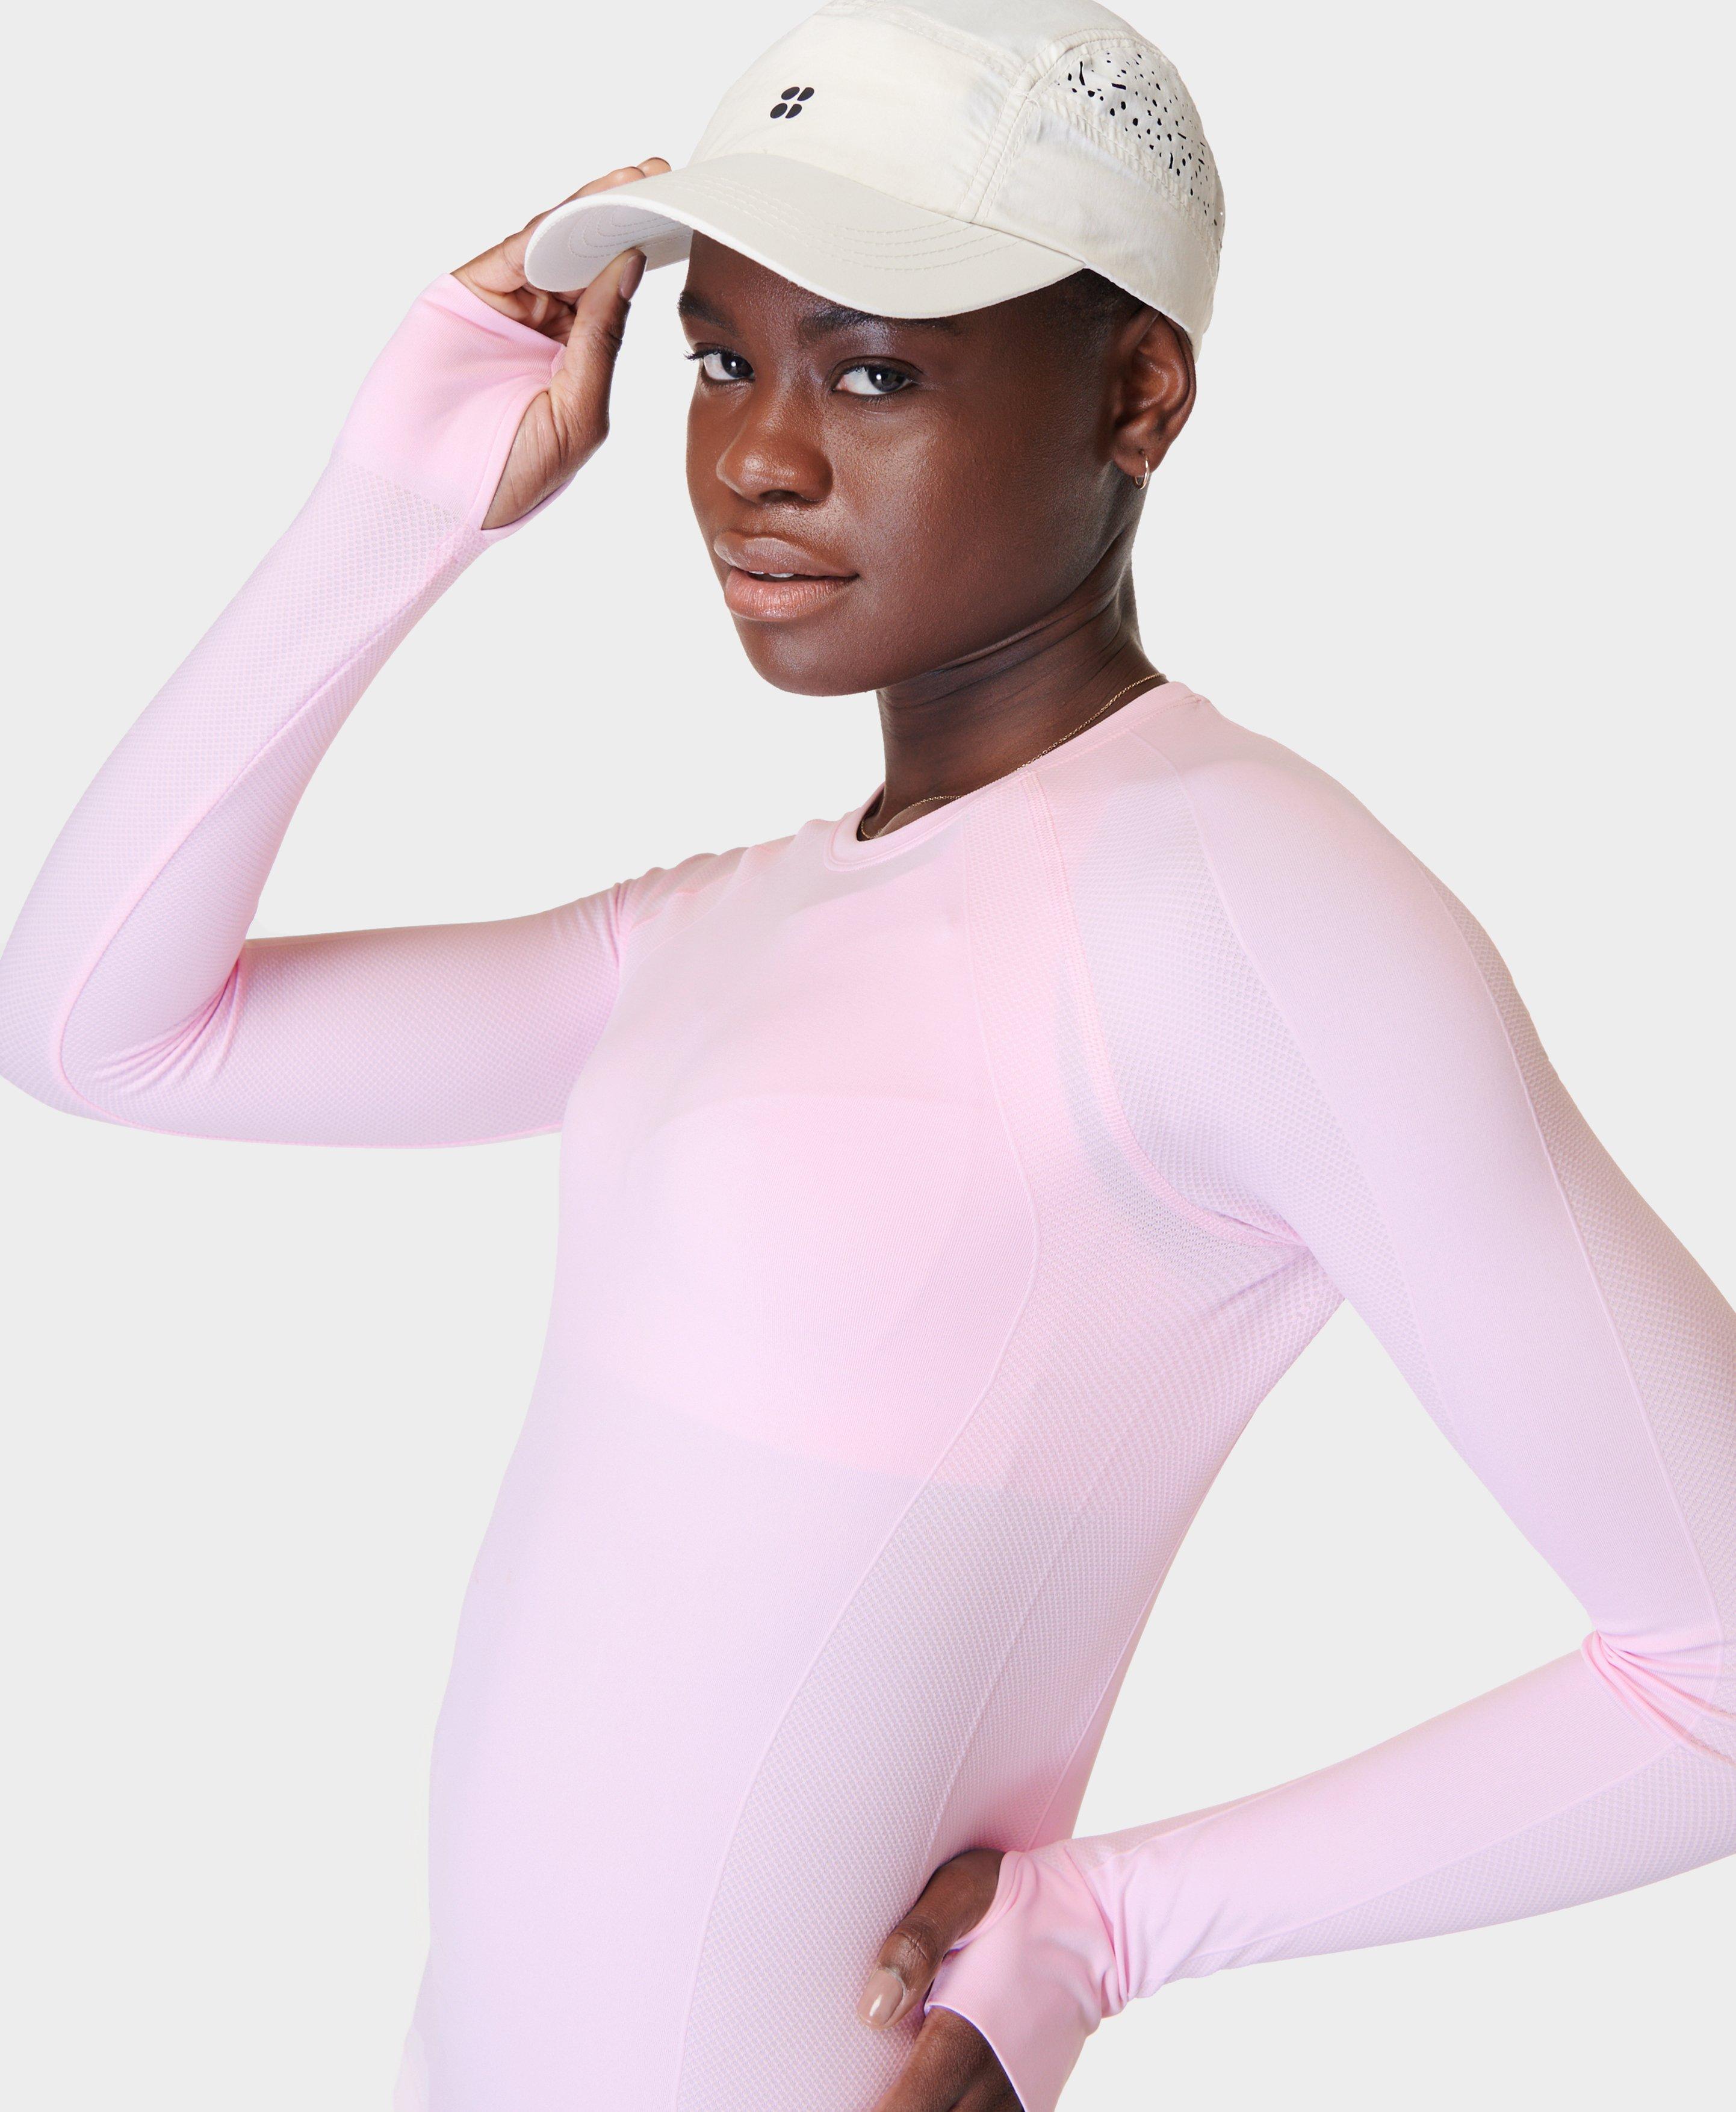 Athlete Seamless Workout Long Sleeve Top - Nerine Pink